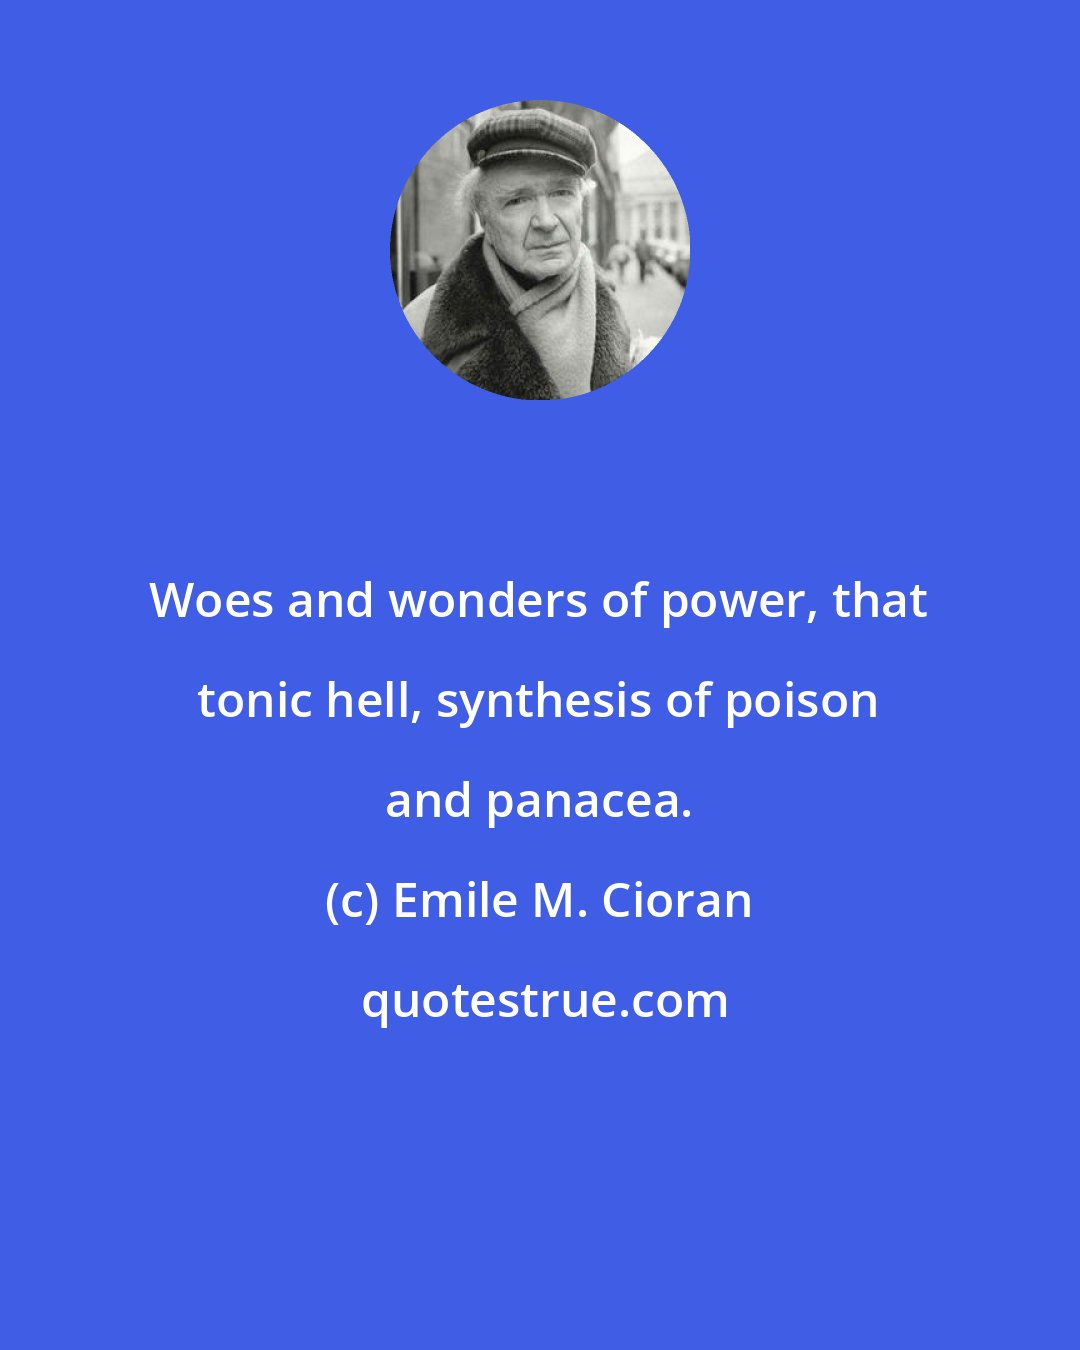 Emile M. Cioran: Woes and wonders of power, that tonic hell, synthesis of poison and panacea.